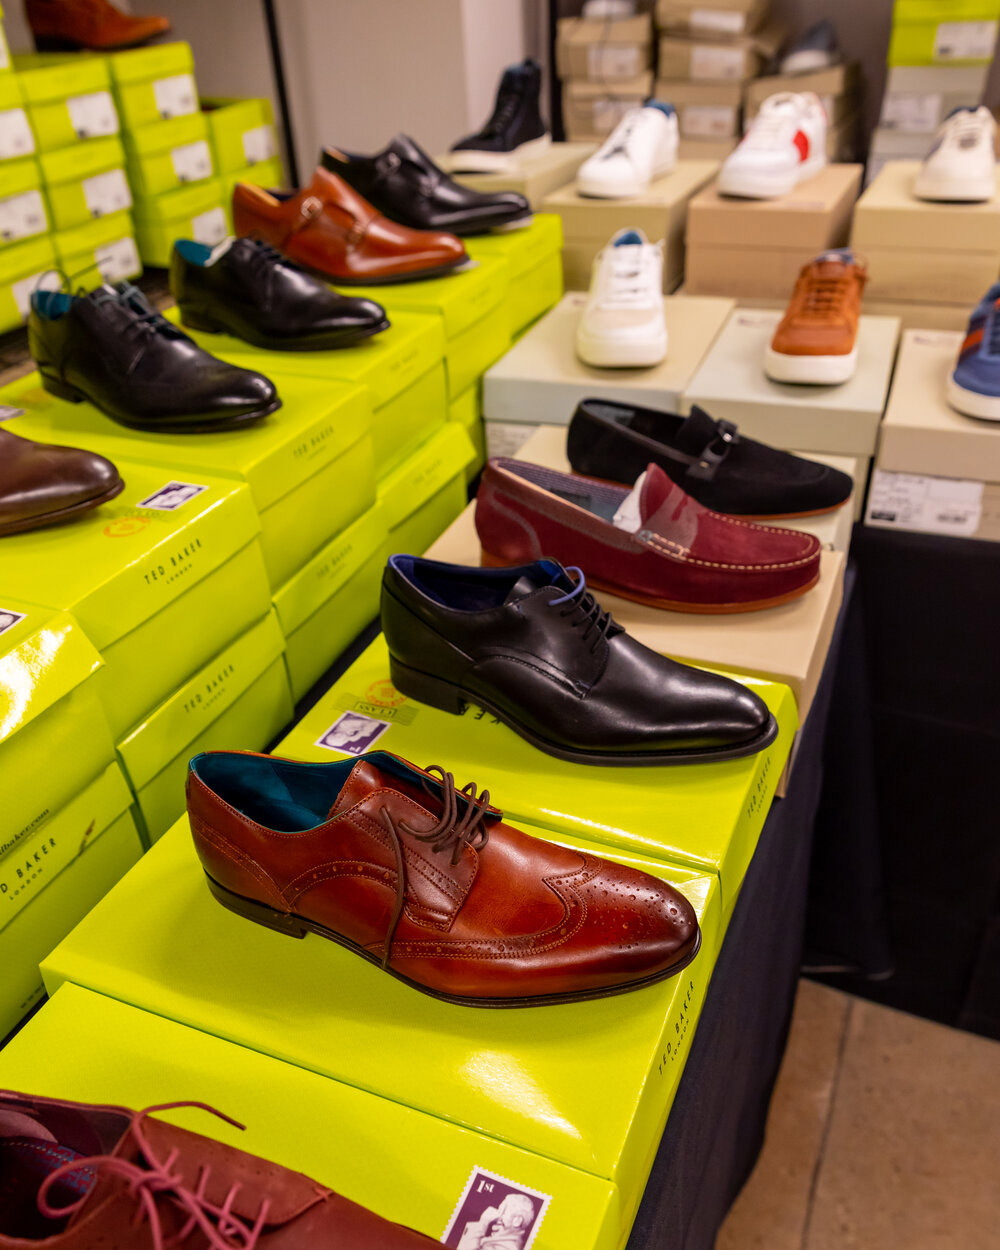 Ted Baker Sample Sale in Images